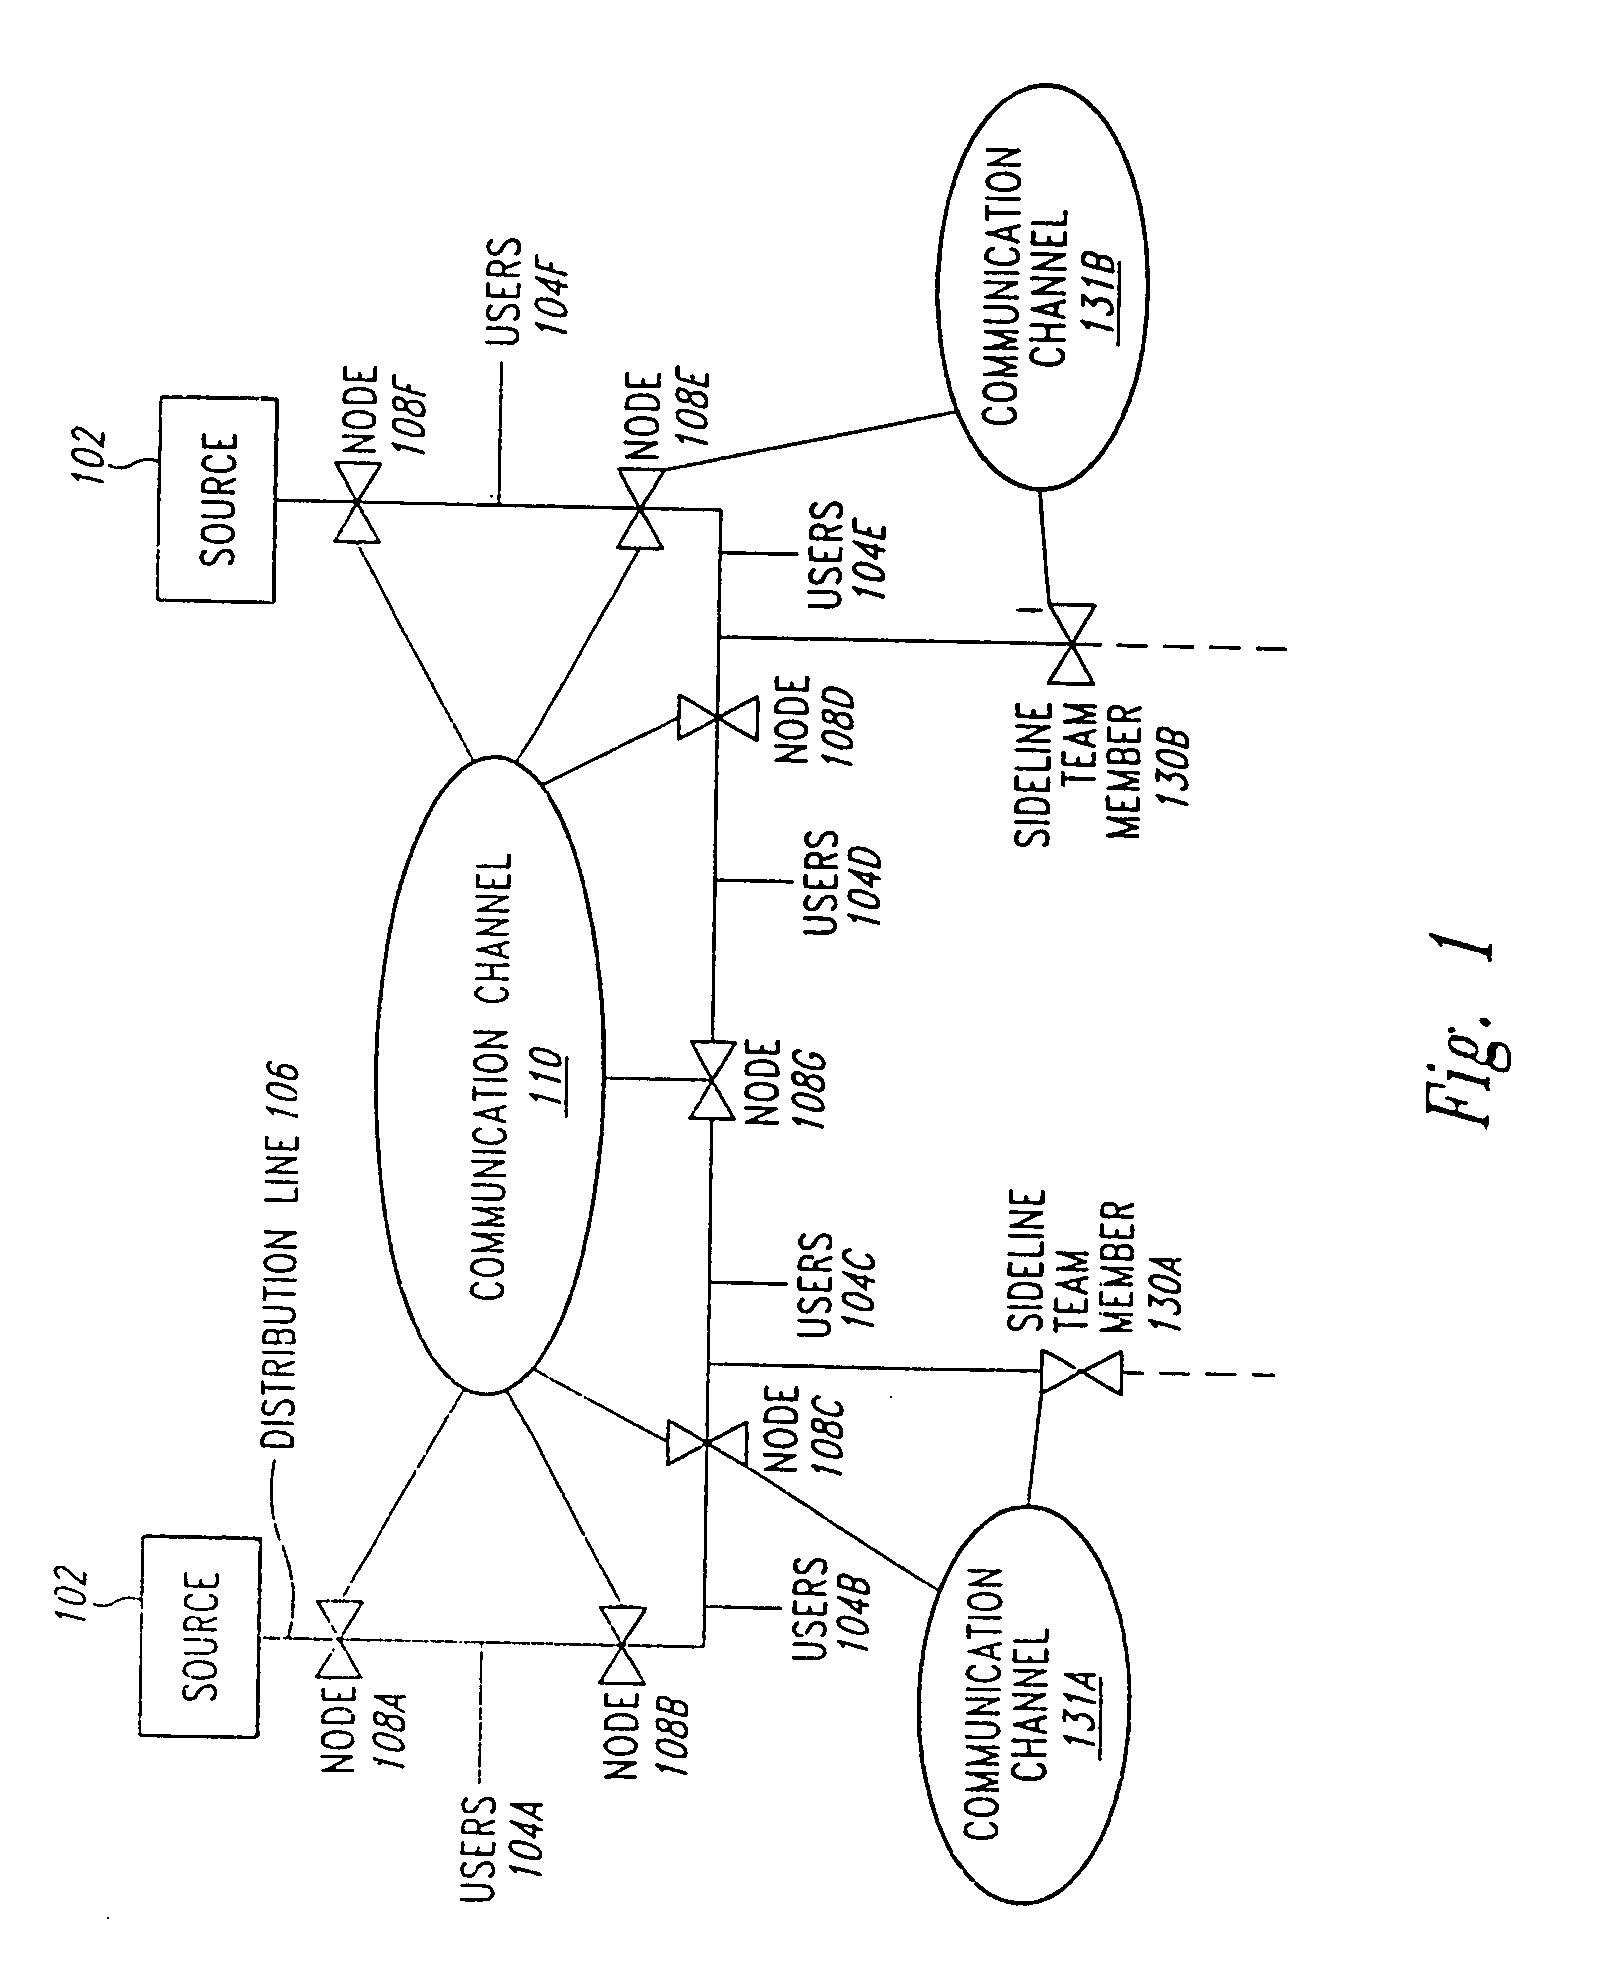 Method and apparatus for control of an electric power distribution system in response to circuit abnormalities